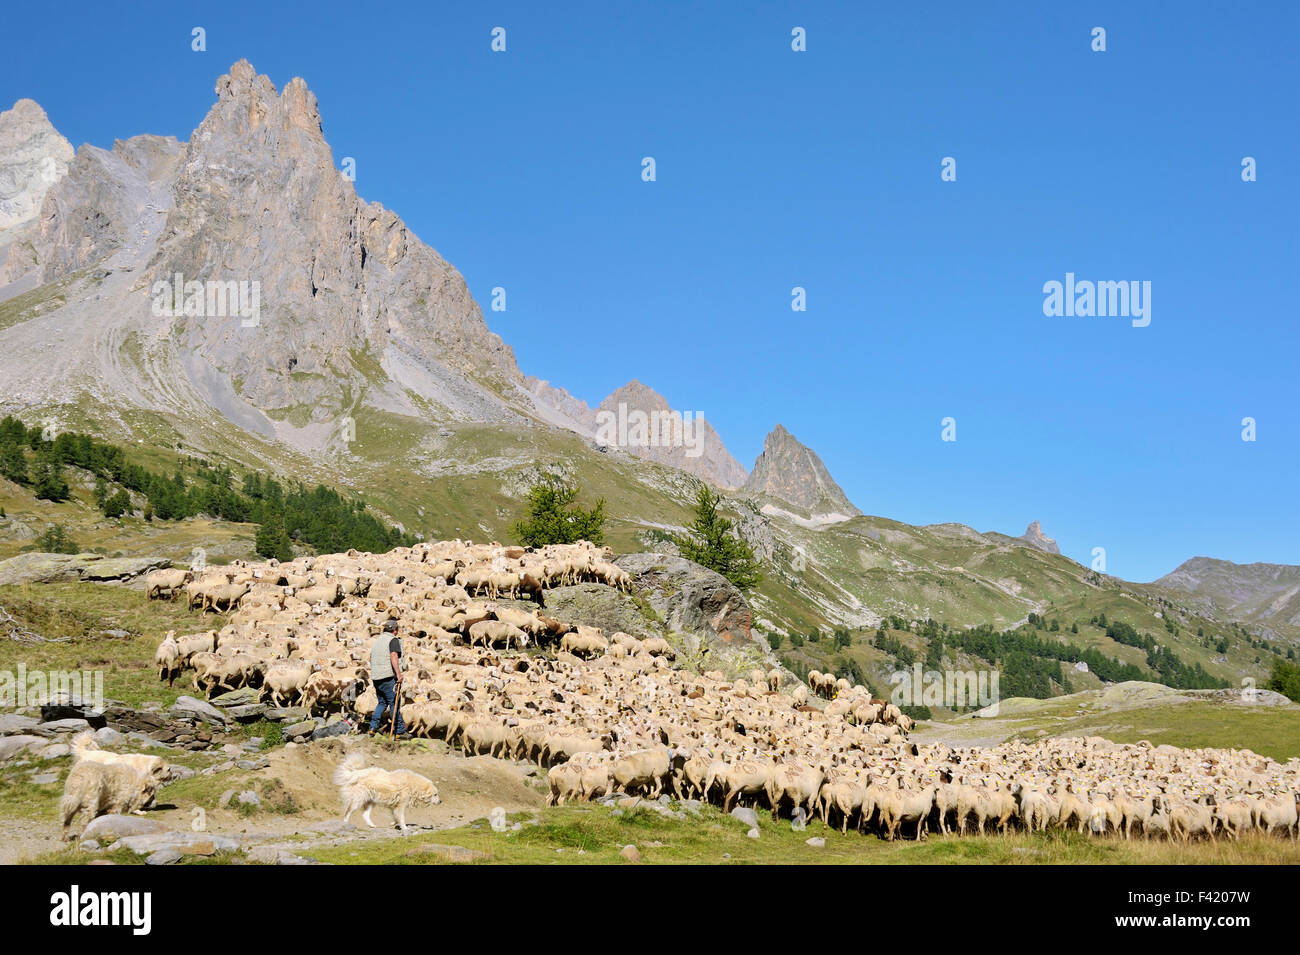 Big flock of sheep and its sheepherder in the mountains Vallée de la Clarée; region Brianconnais,  French Alps, France Stock Photo